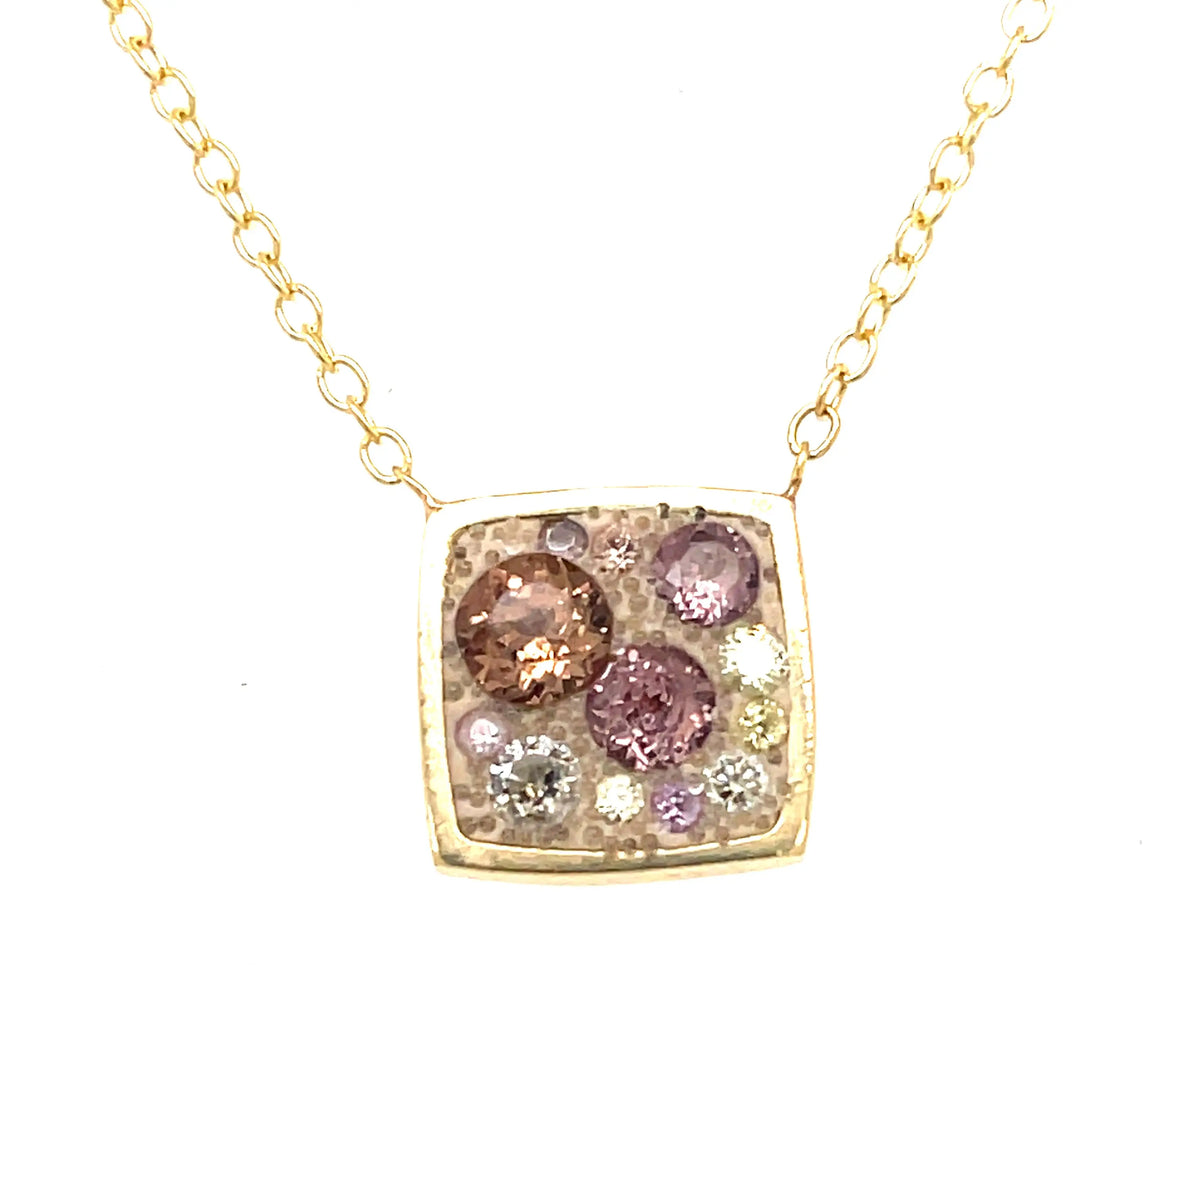 14k yellow gold square gold pendant with garnet and diamonds on a 18 inch chain  One of a kind  Designed by Miles McNeel